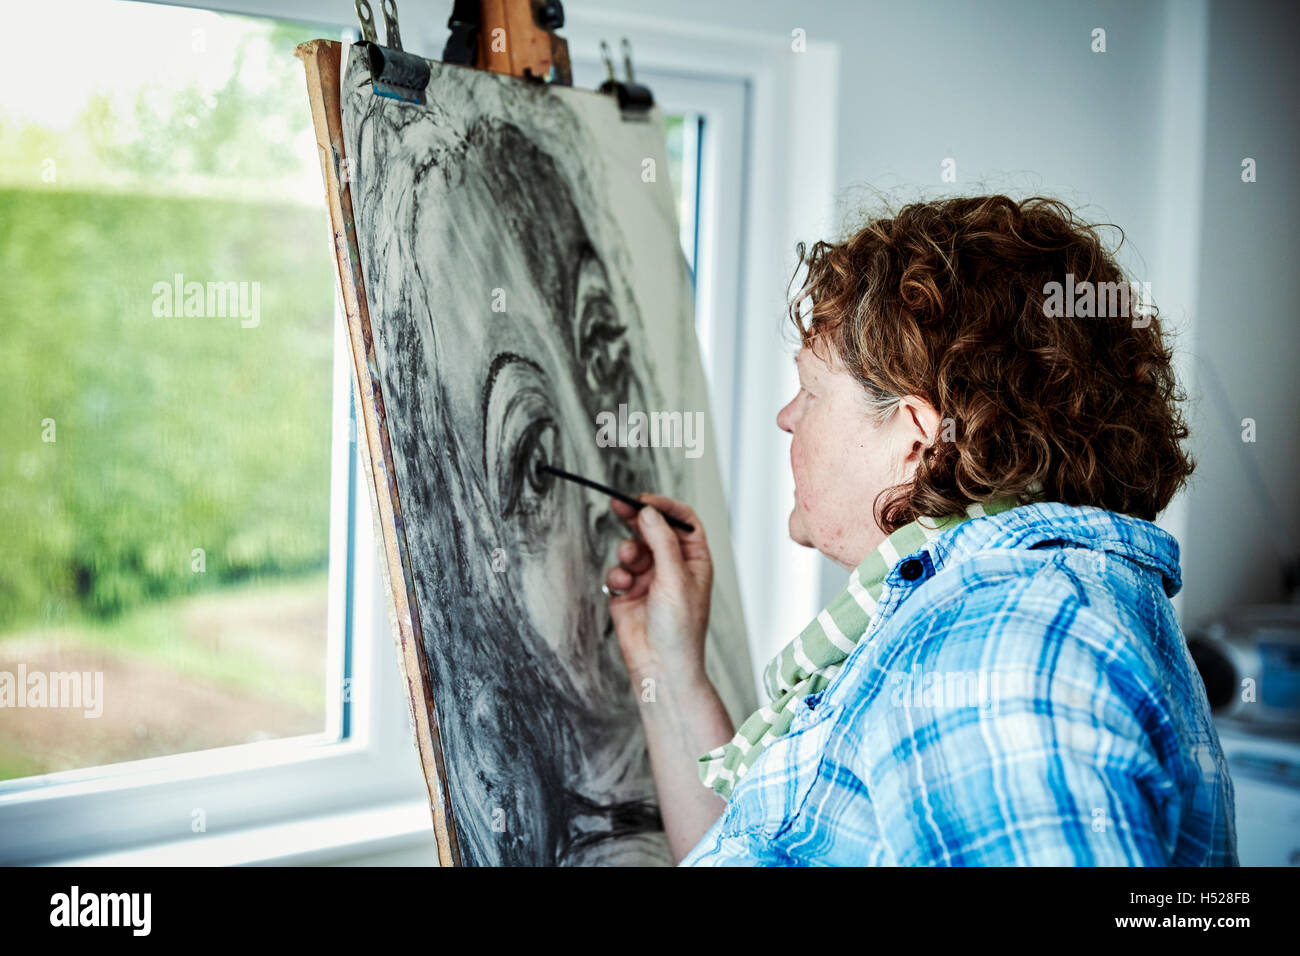 An artist working at her easel, using charcoal on paper drawing a portrait. Stock Photo